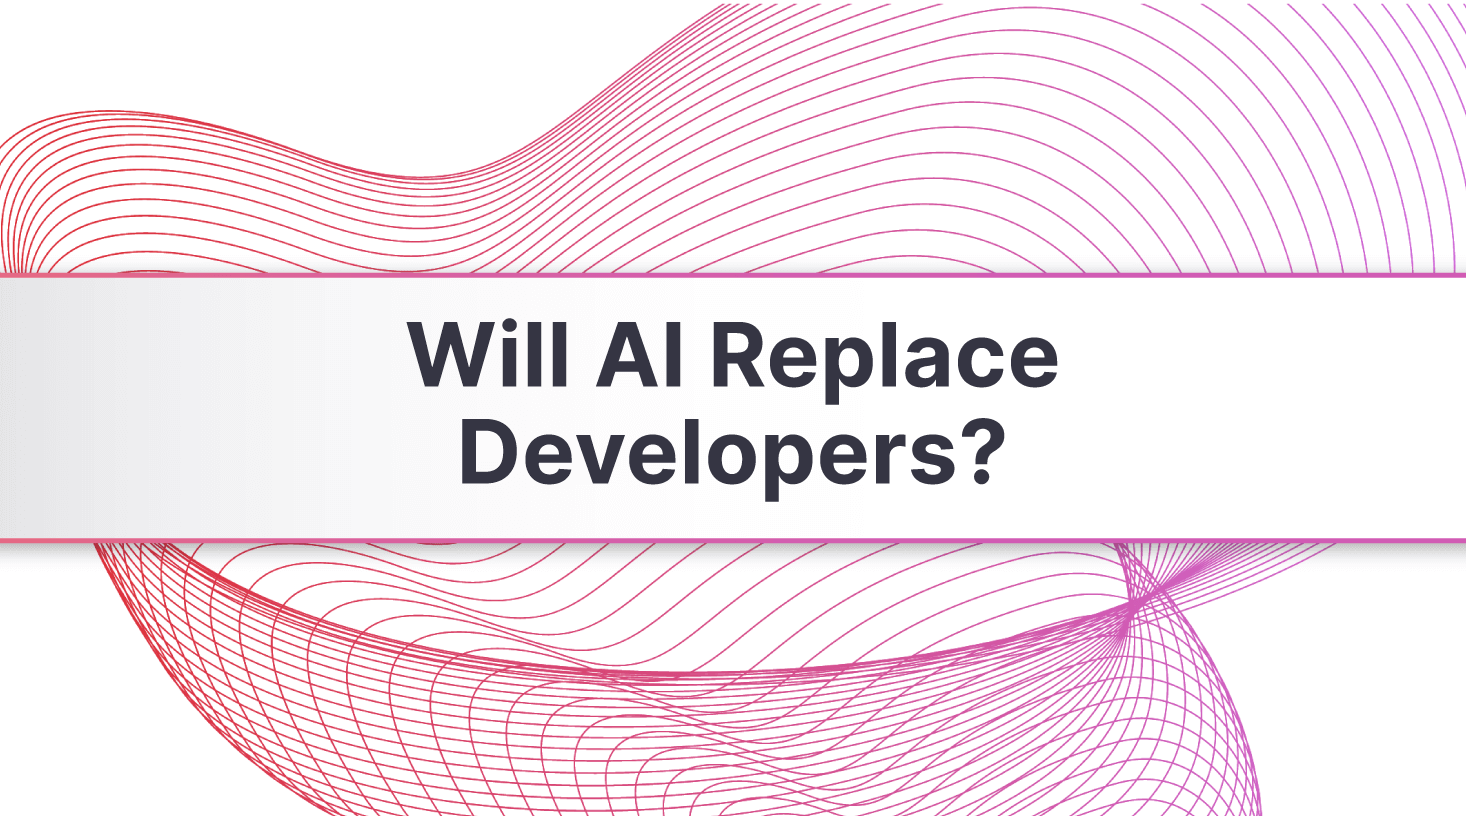 Coding Bootcamp CEO takes on the question WIll AI Replace Developers?